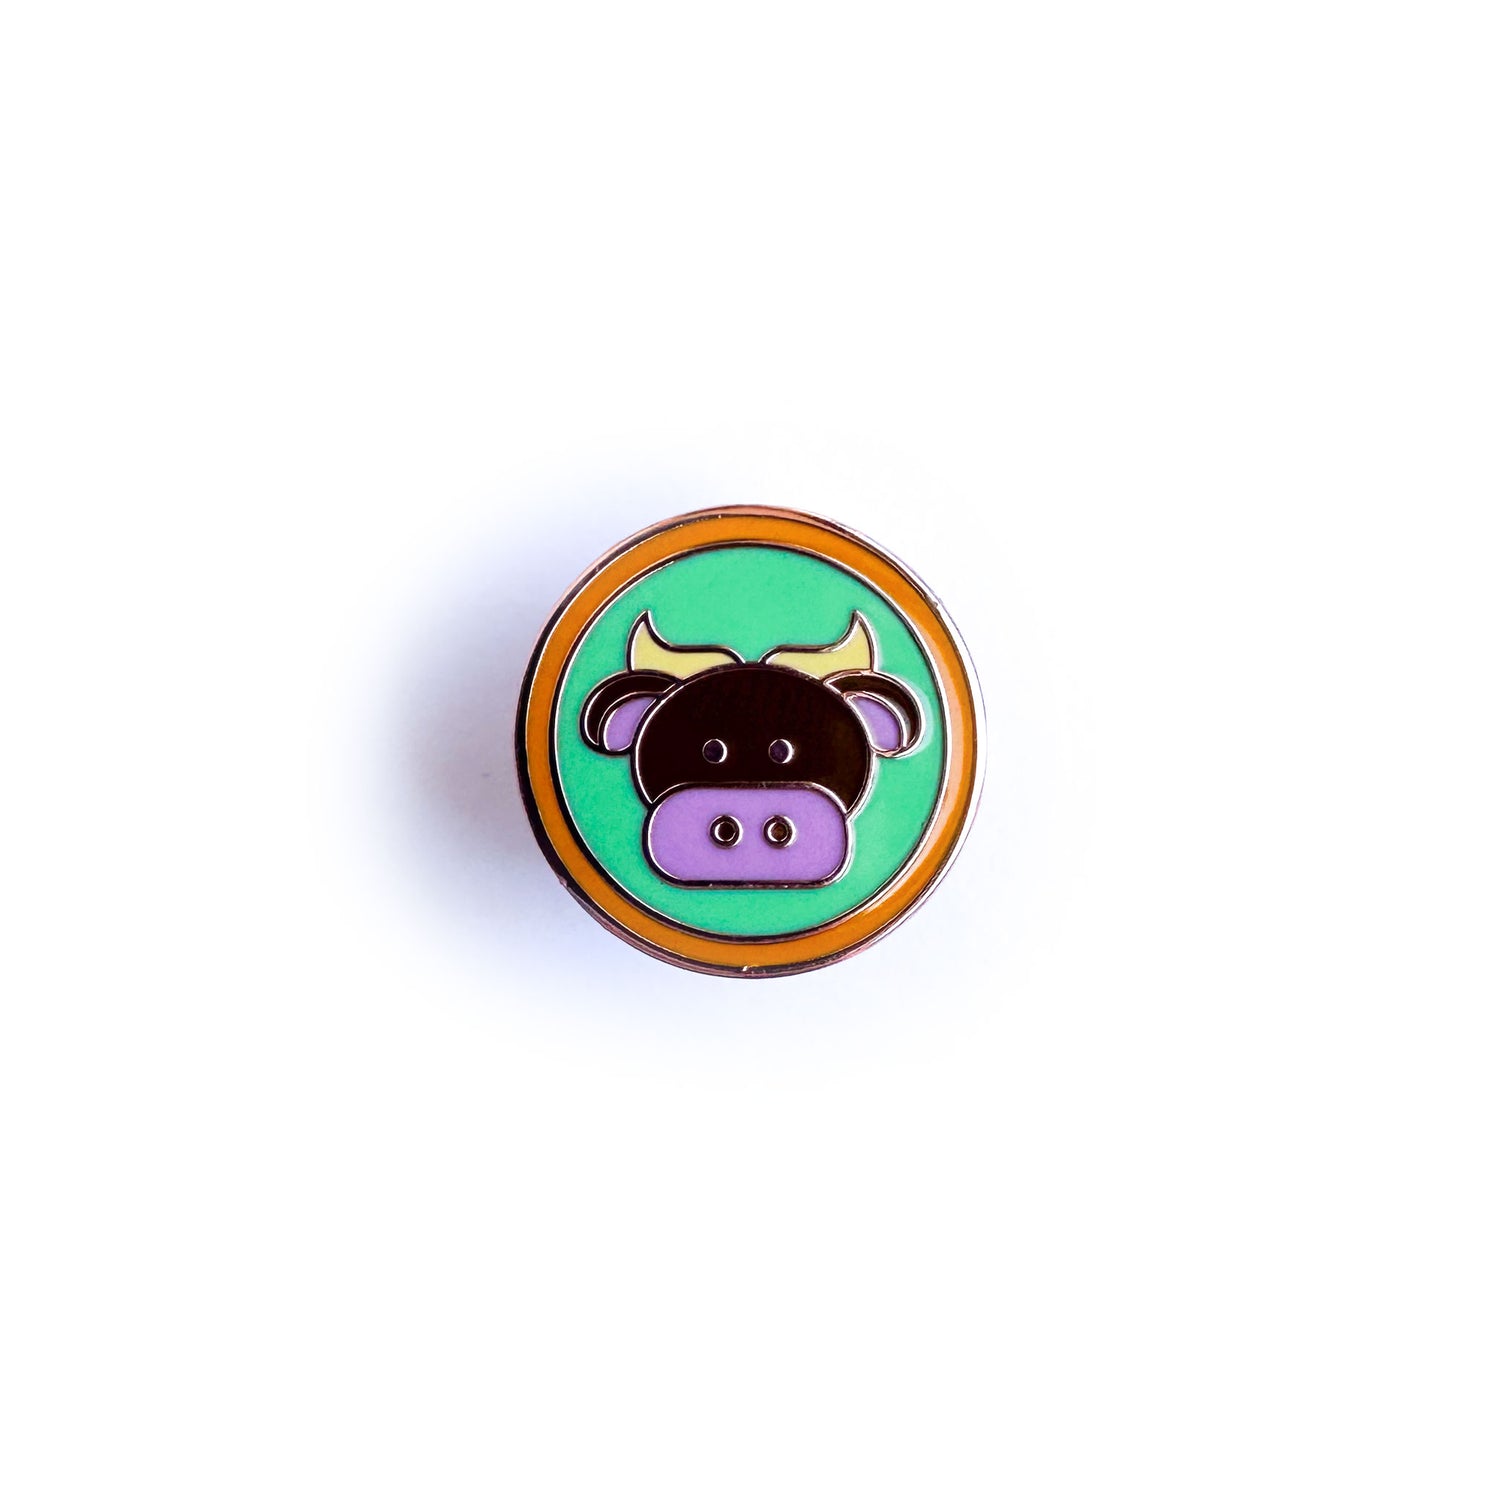 An enamel pin of a green circle with an orange border with a cute brown bull inside the green circle. The bull is meant to represent the Taurus Zodiac sign.